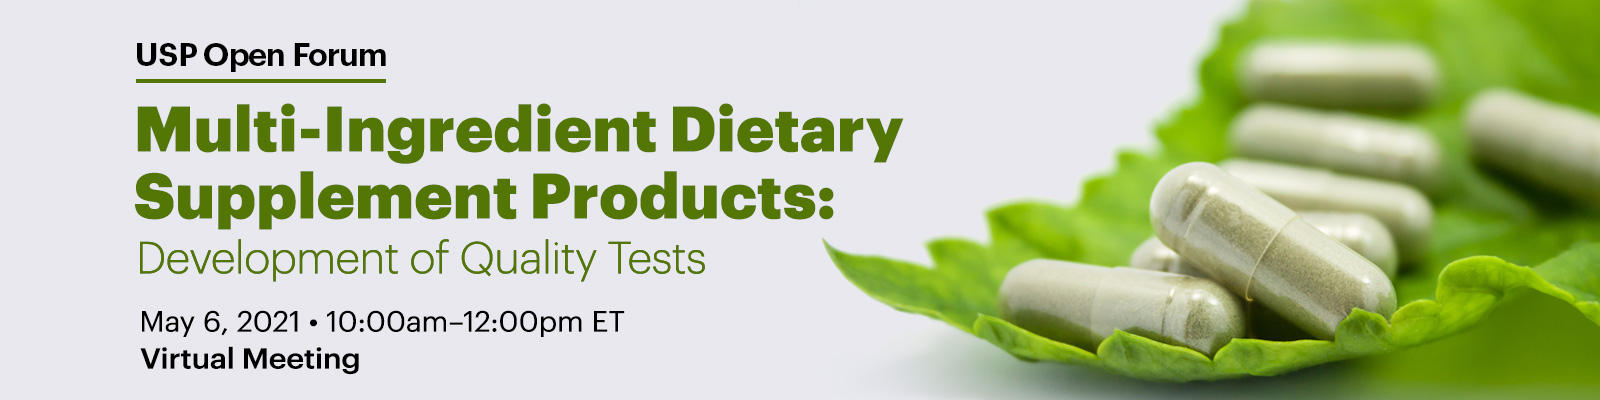 Multi-Ingredient Dietary Supplement Products